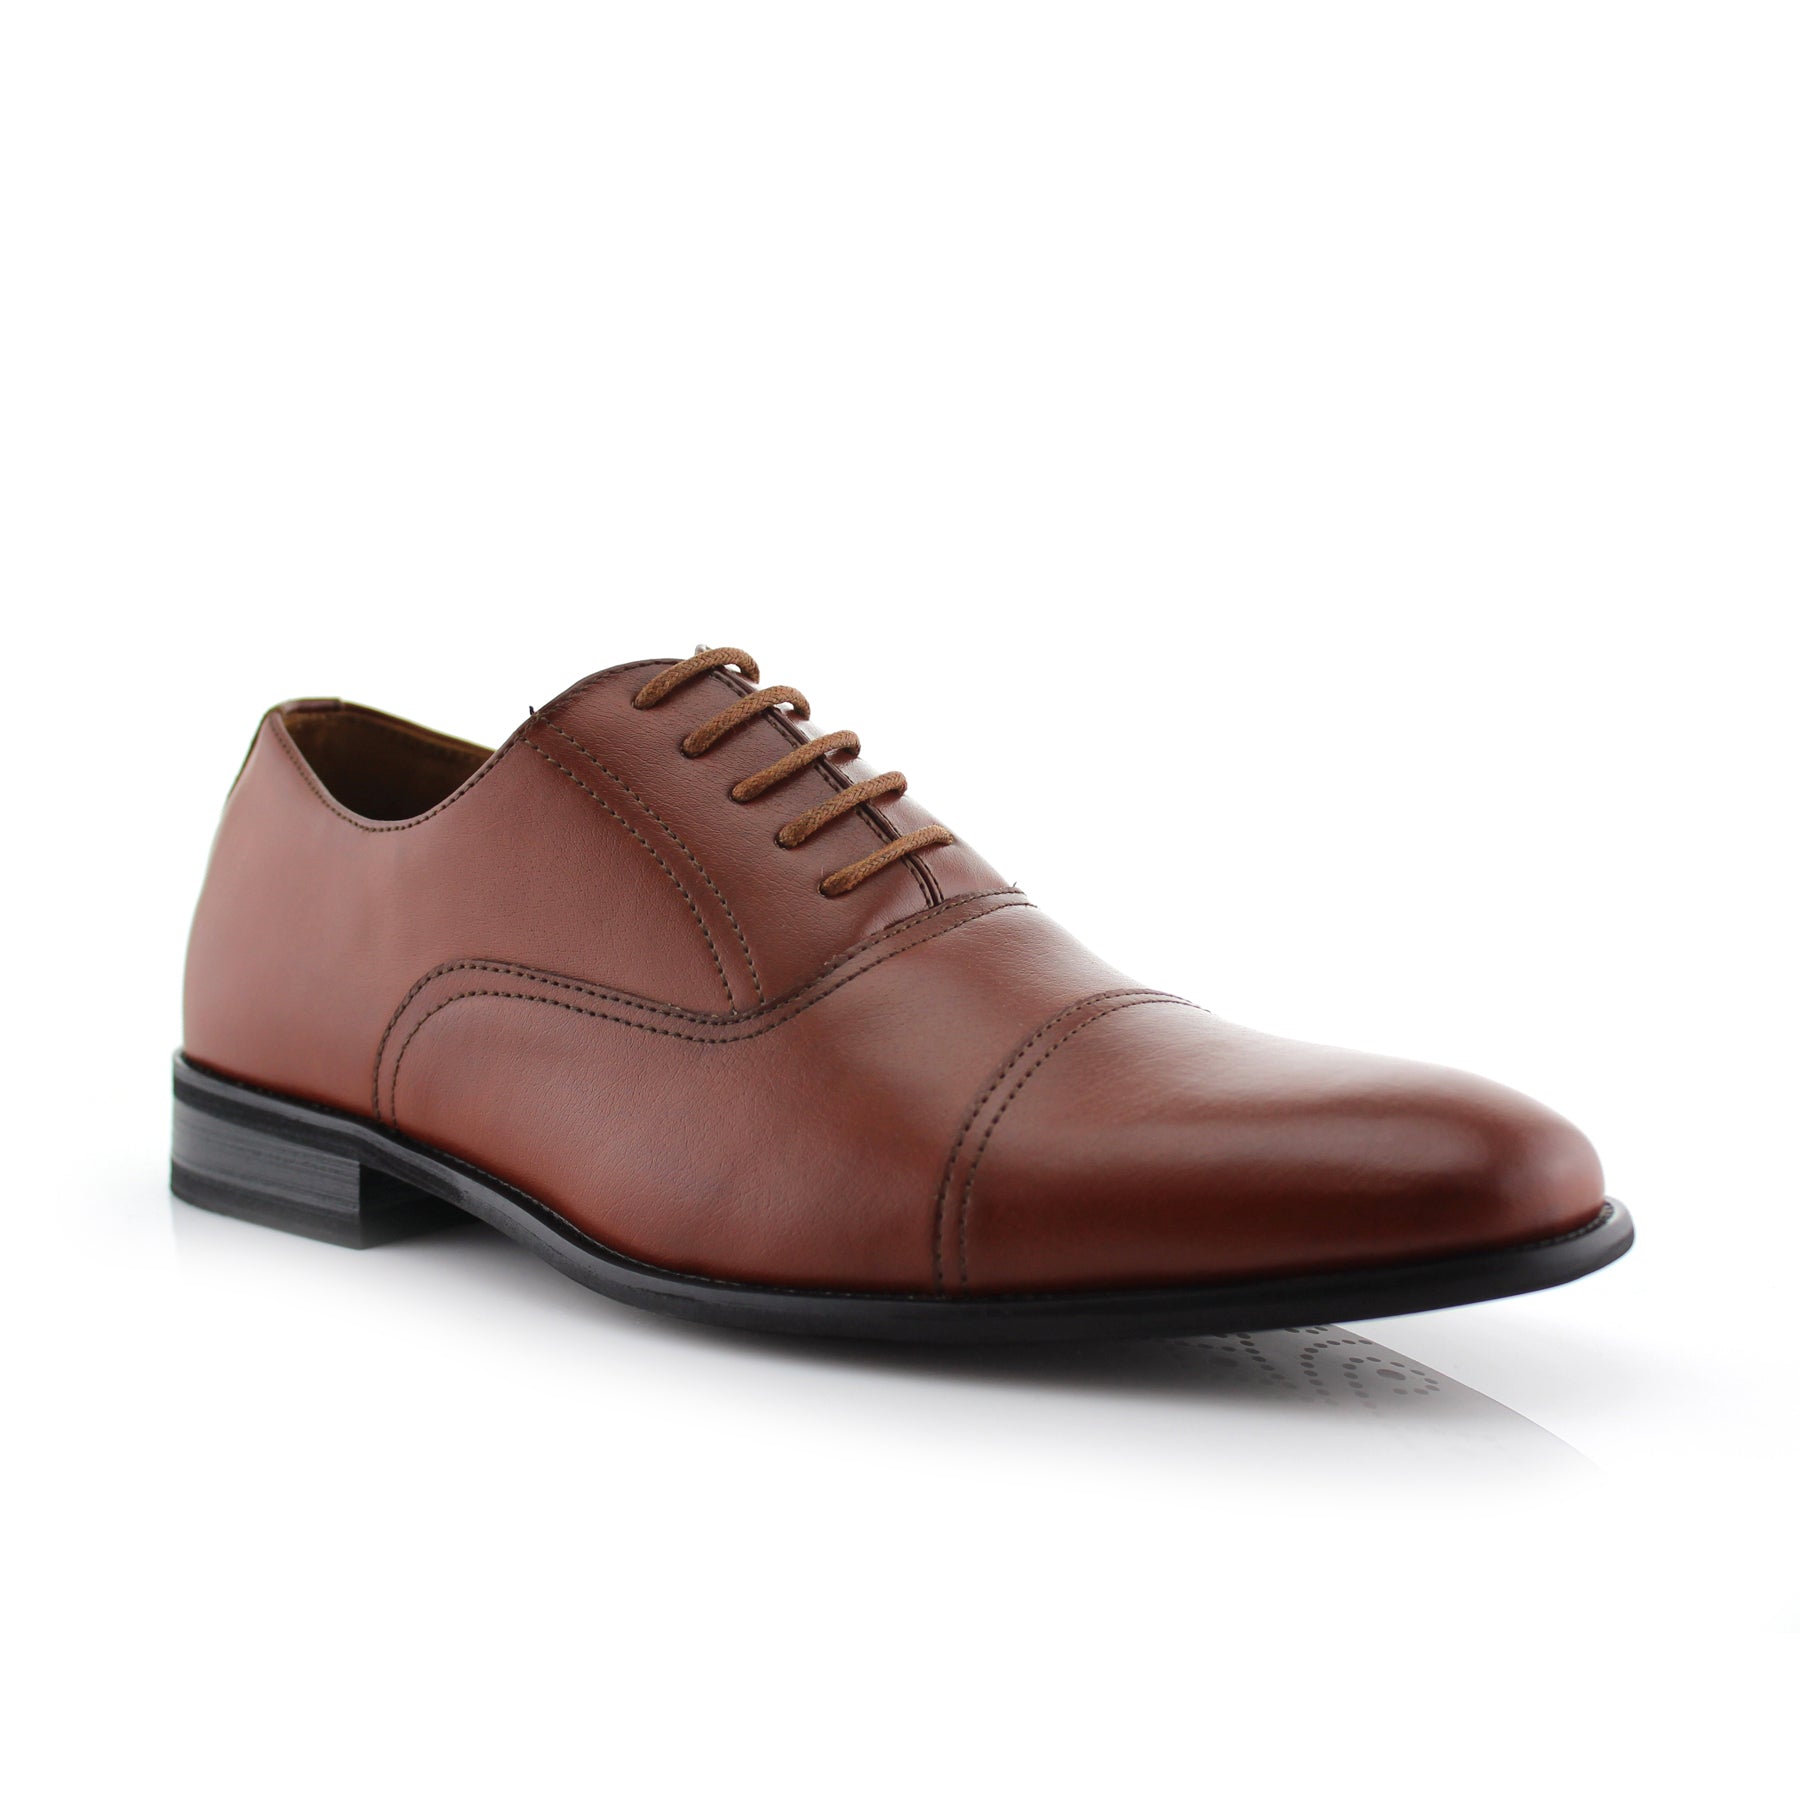 Classic Cap-Toe Oxford Dress Shoes | Charles by Ferro Aldo | Conal Footwear | Main Angle View